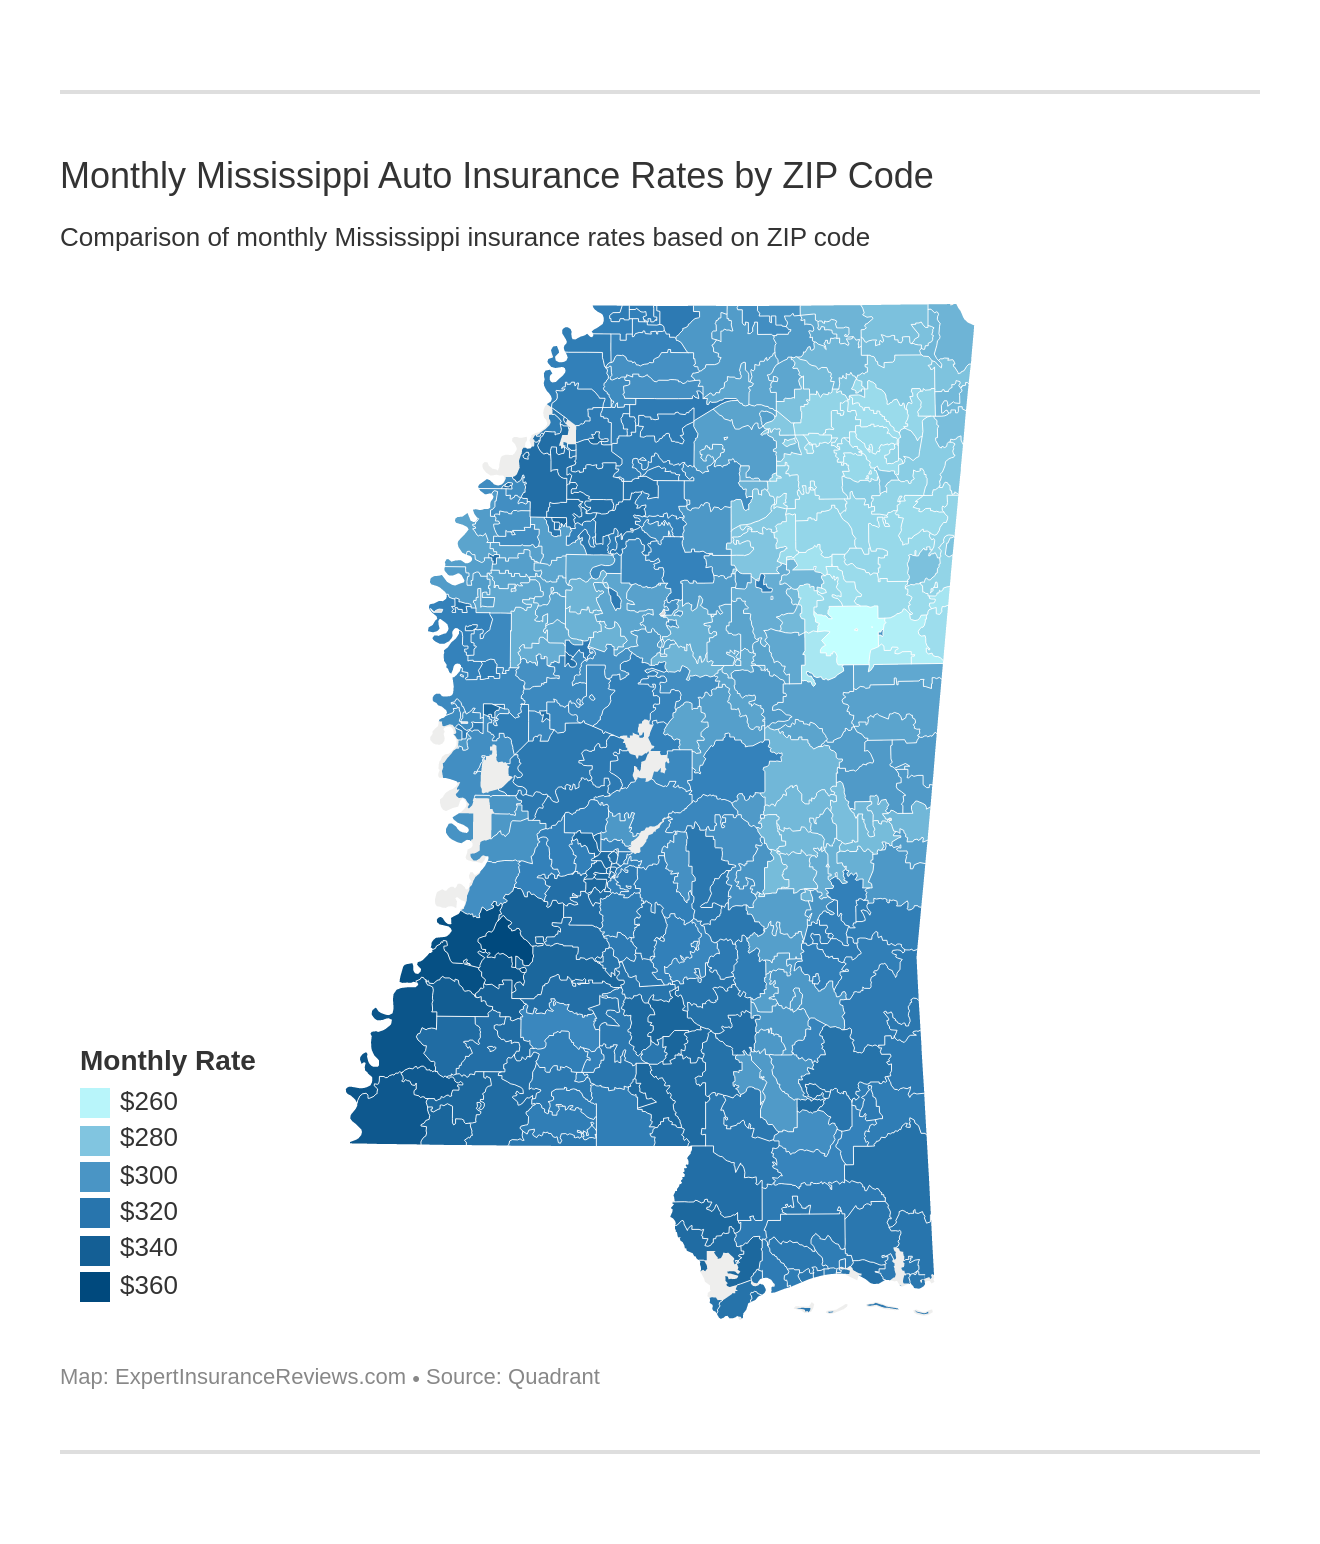 Monthly Mississippi Auto Insurance Rates by ZIP Code